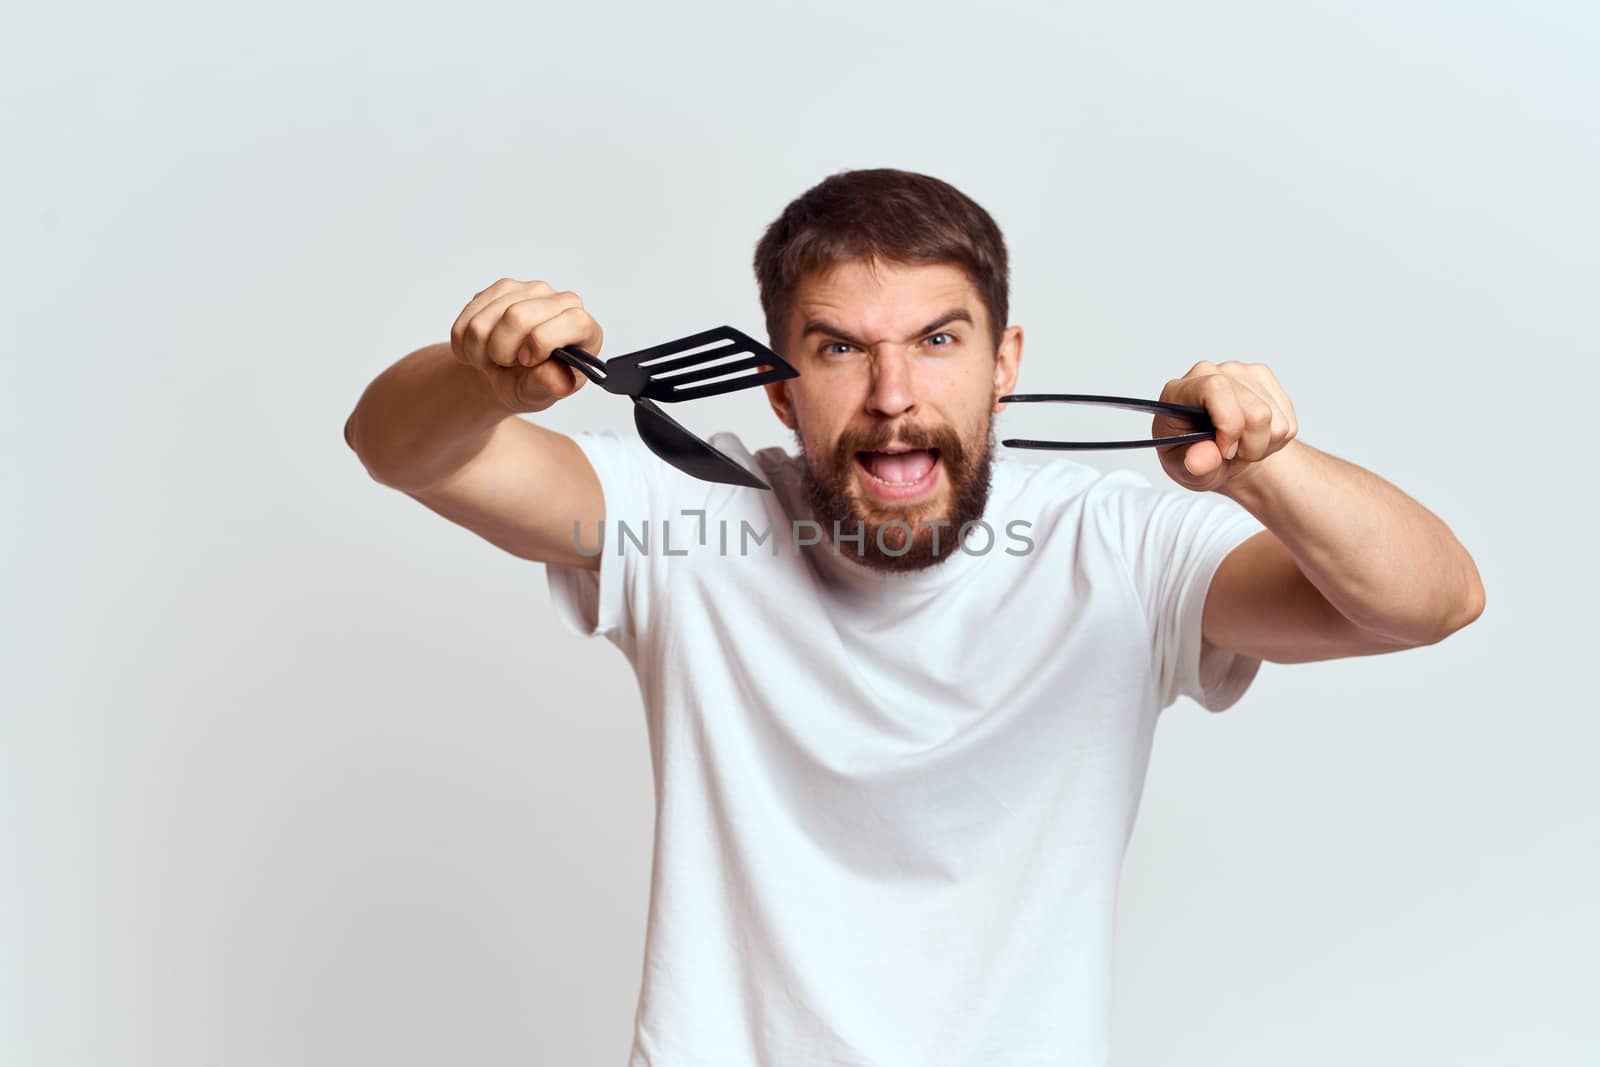 A man with kitchen appliances in the hands of their white T-shirt on a light background cropped view by SHOTPRIME